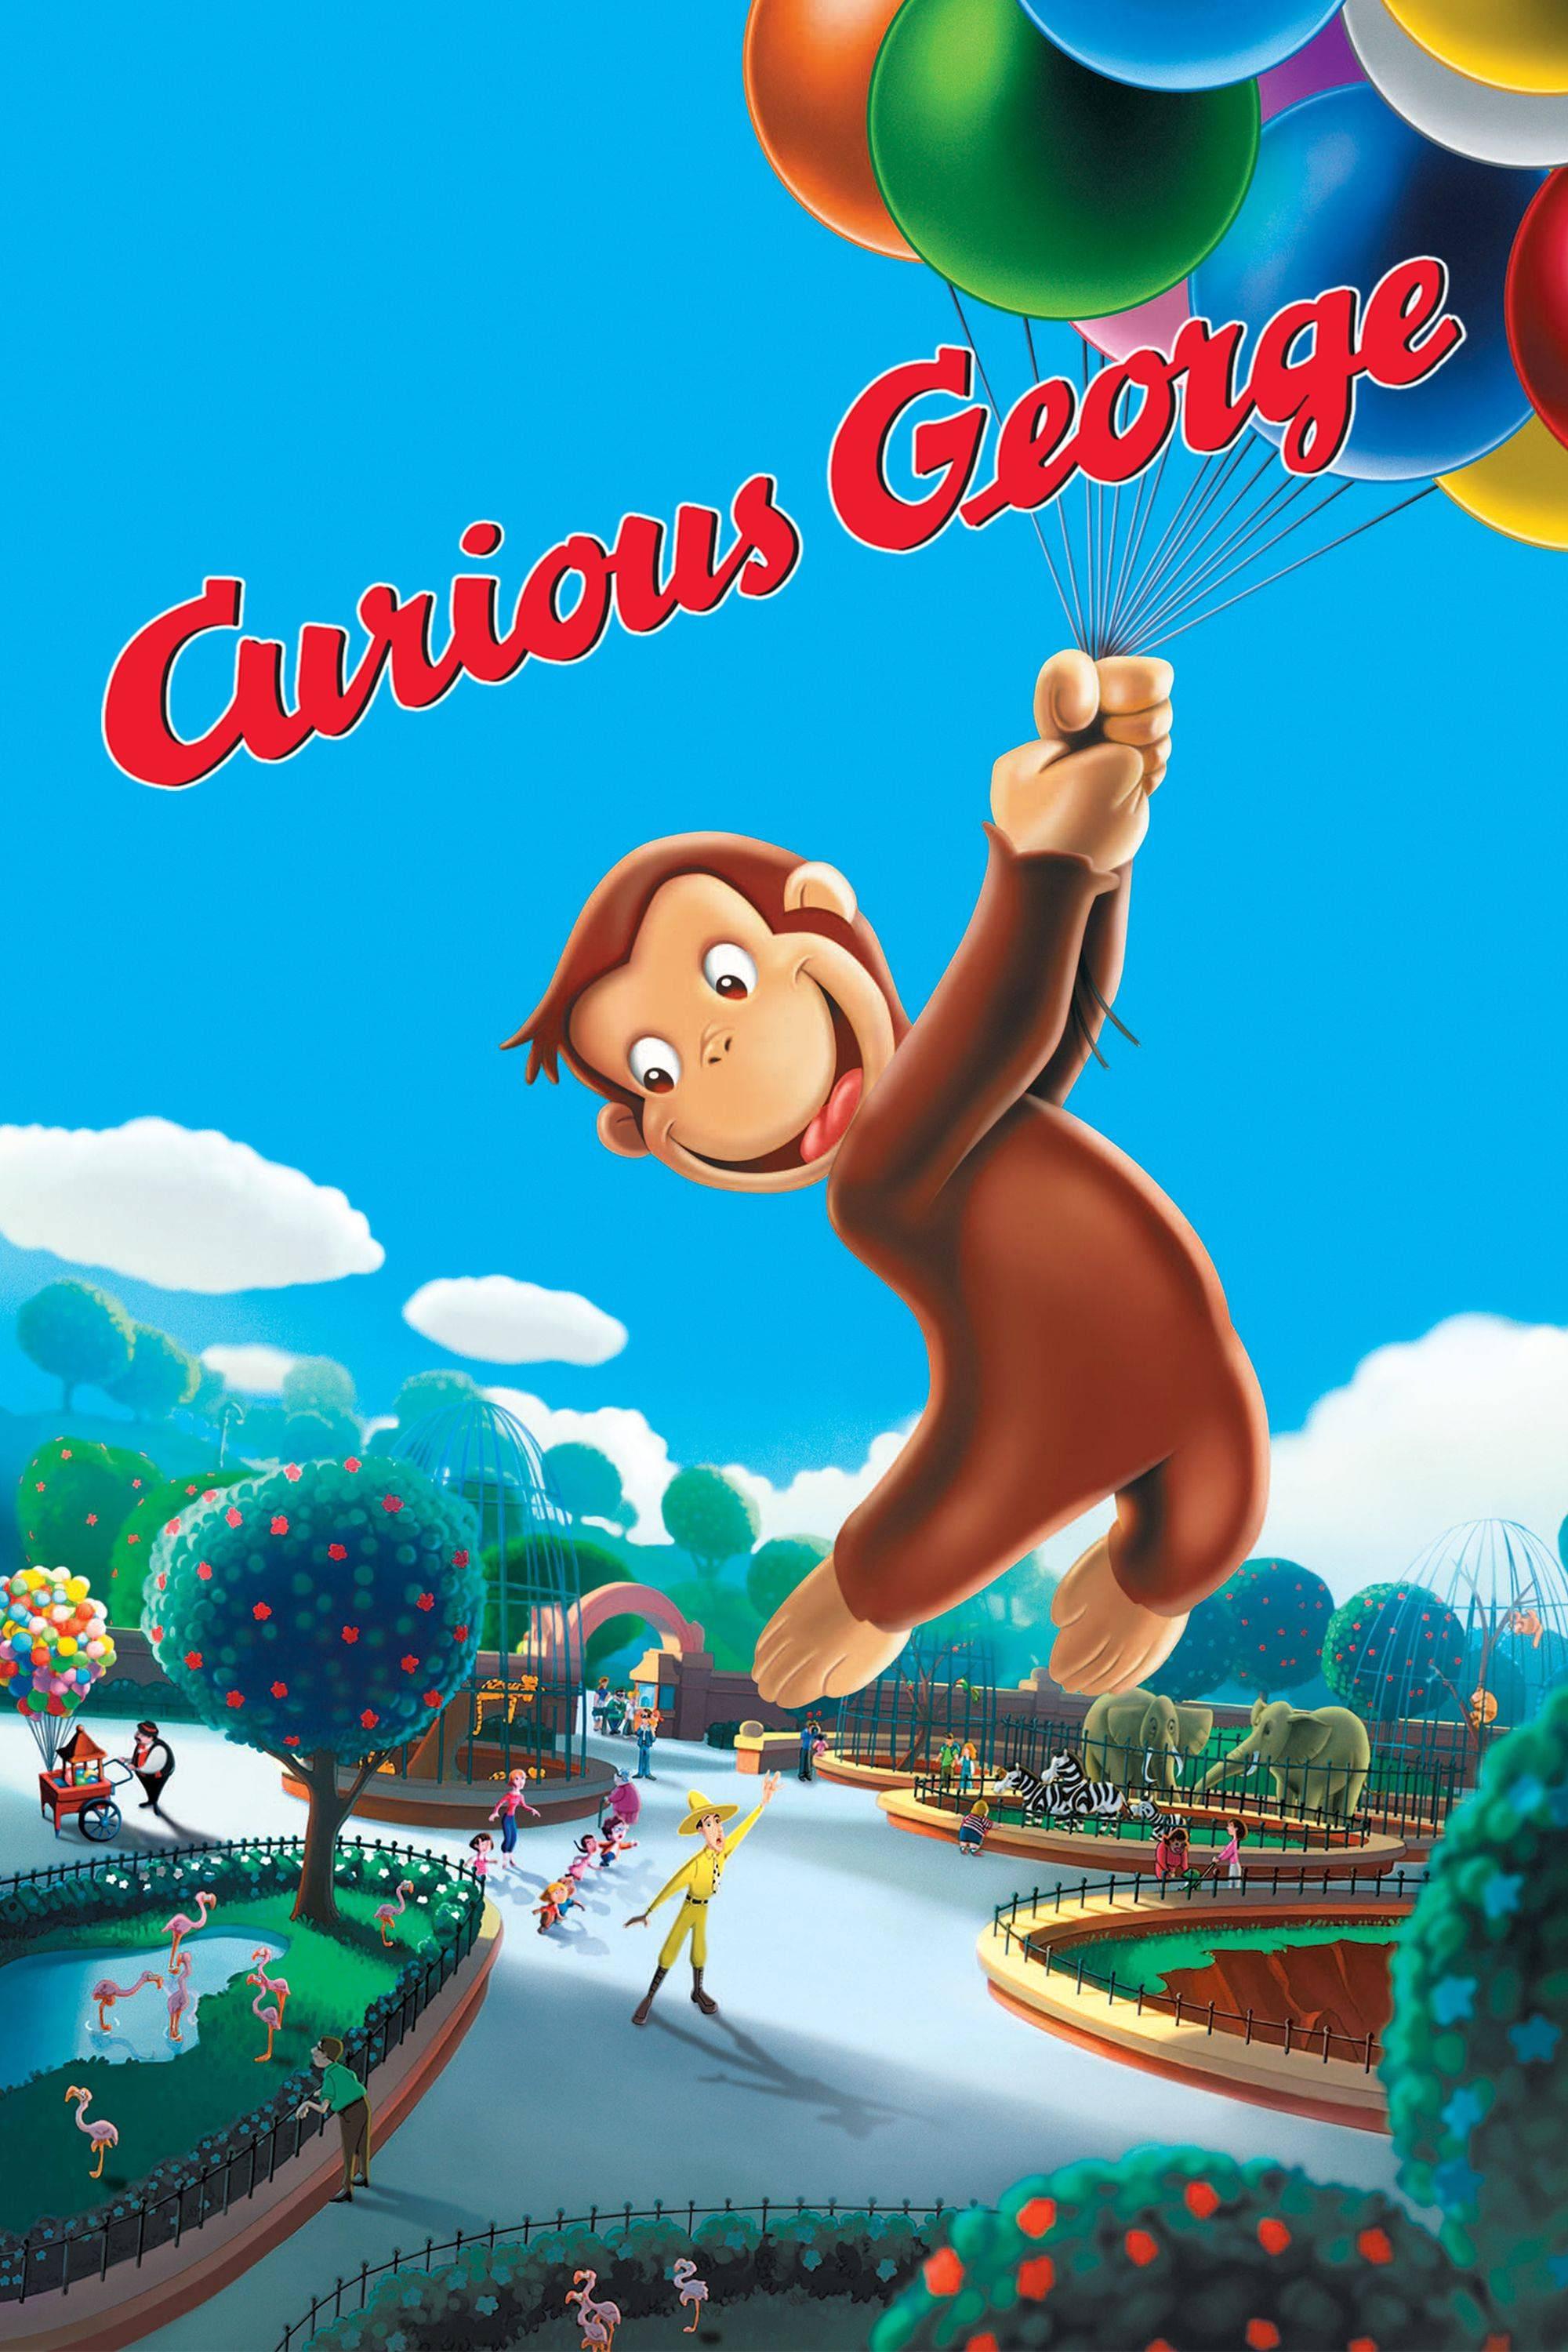 Curious George poster